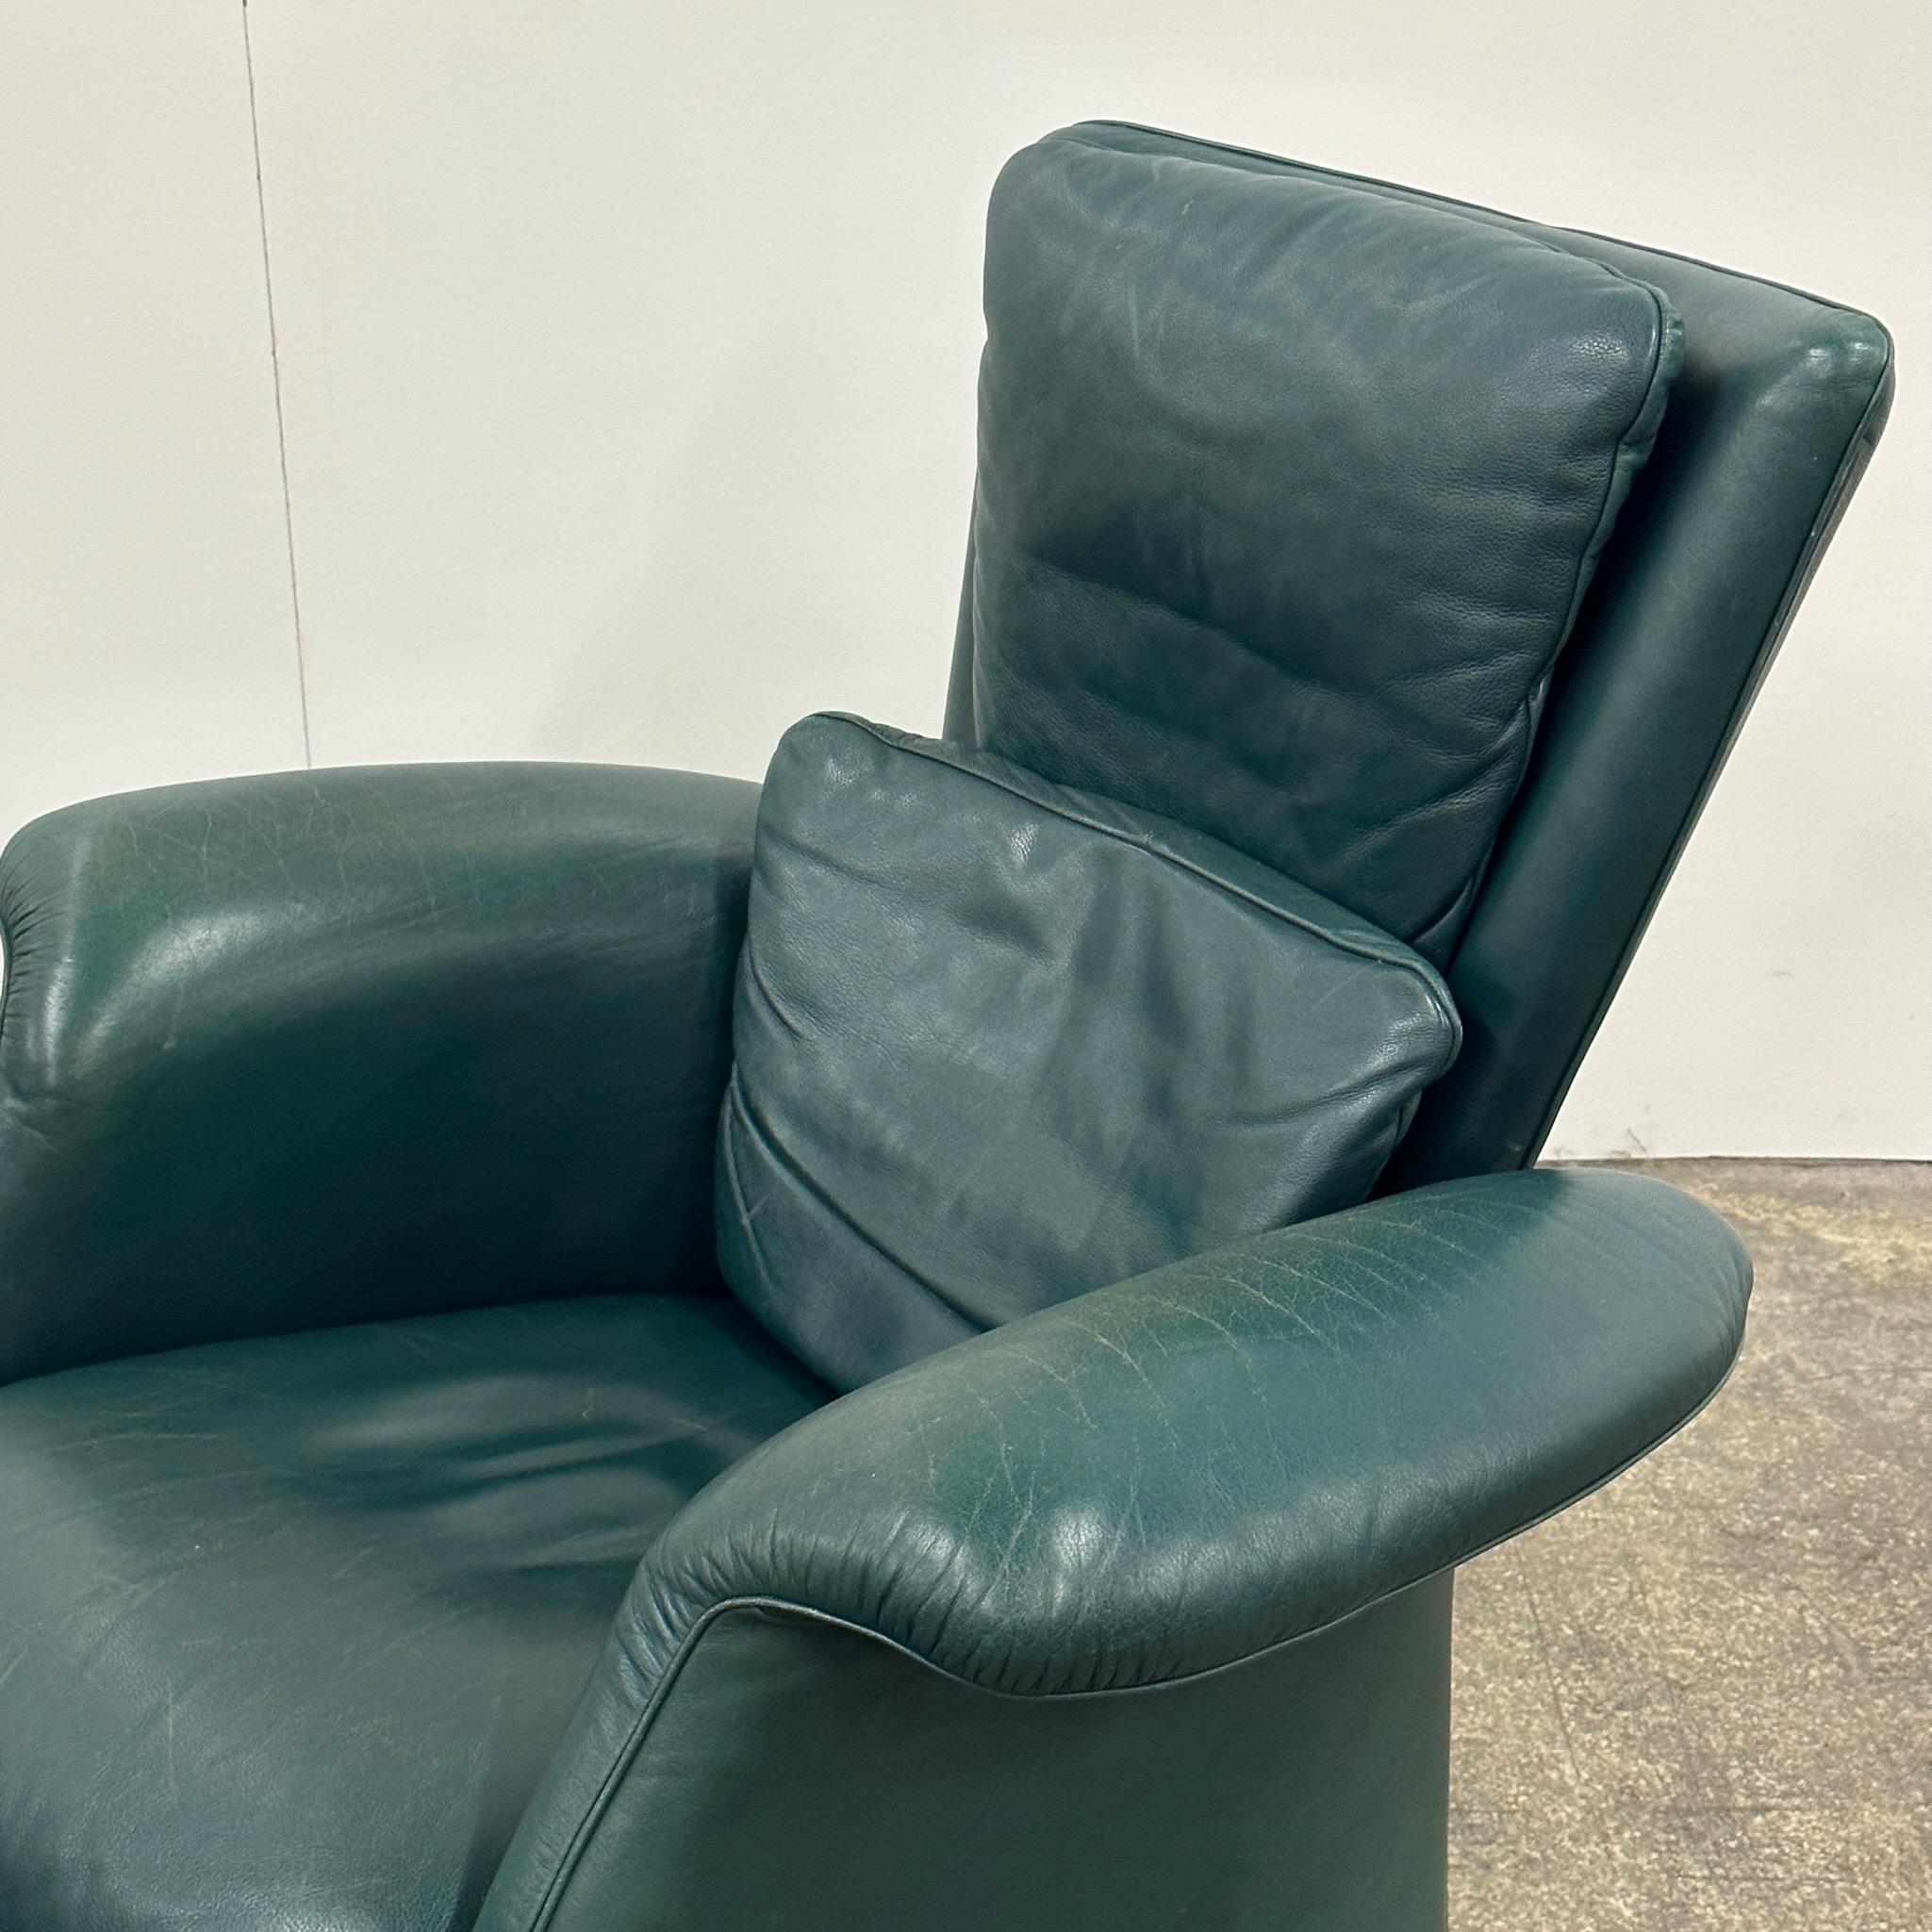 c. 1980s. Price is for the set. Contact us if you’d like to purchase a single item. Green leather upholstery on tubular feet, also features a tubular back. 